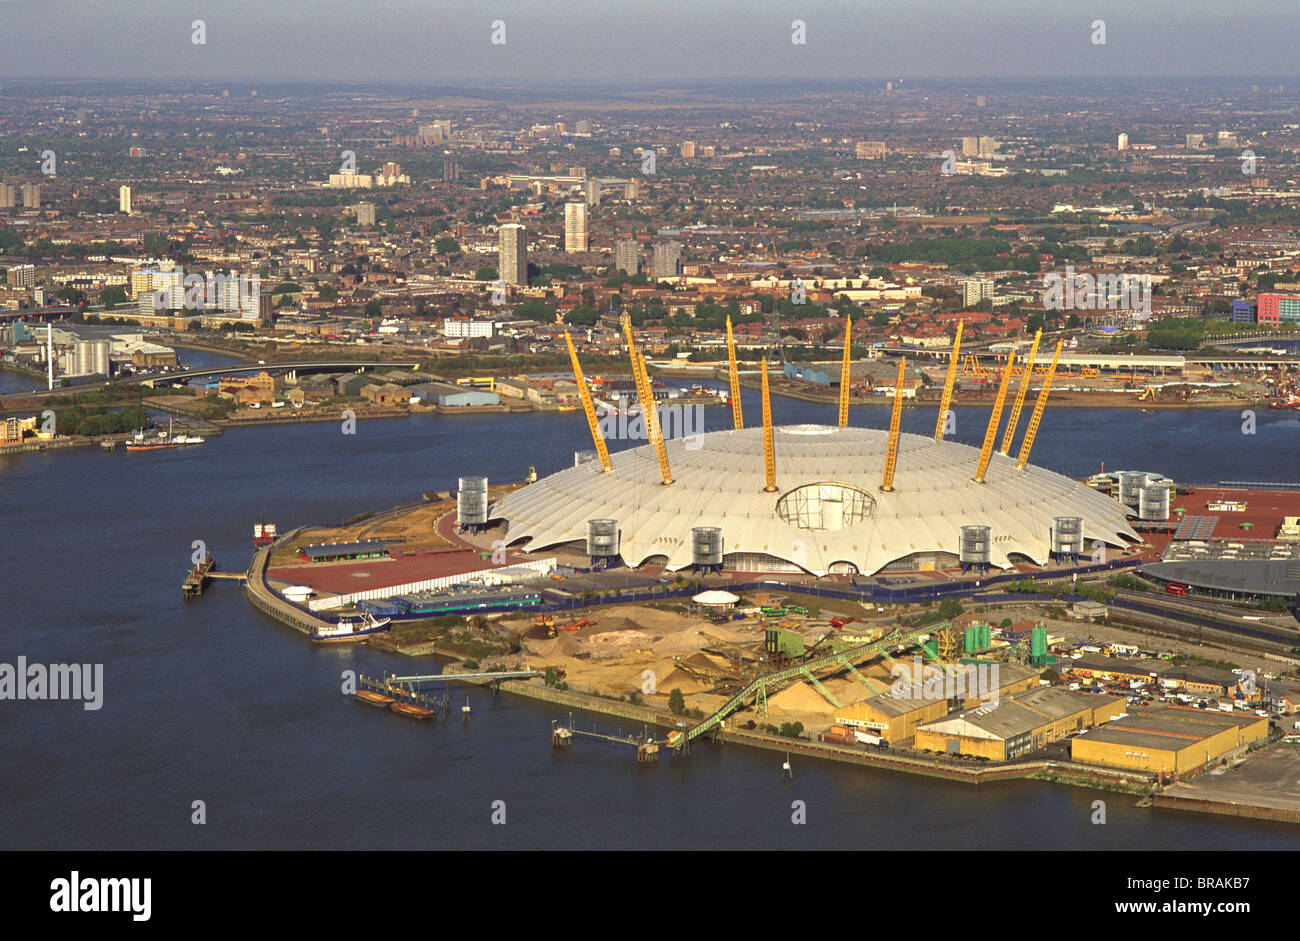 Aerial image of the Millennium Dome and the River Thames, Greenwich Peninsula, South East London, London, England, UK Stock Photo